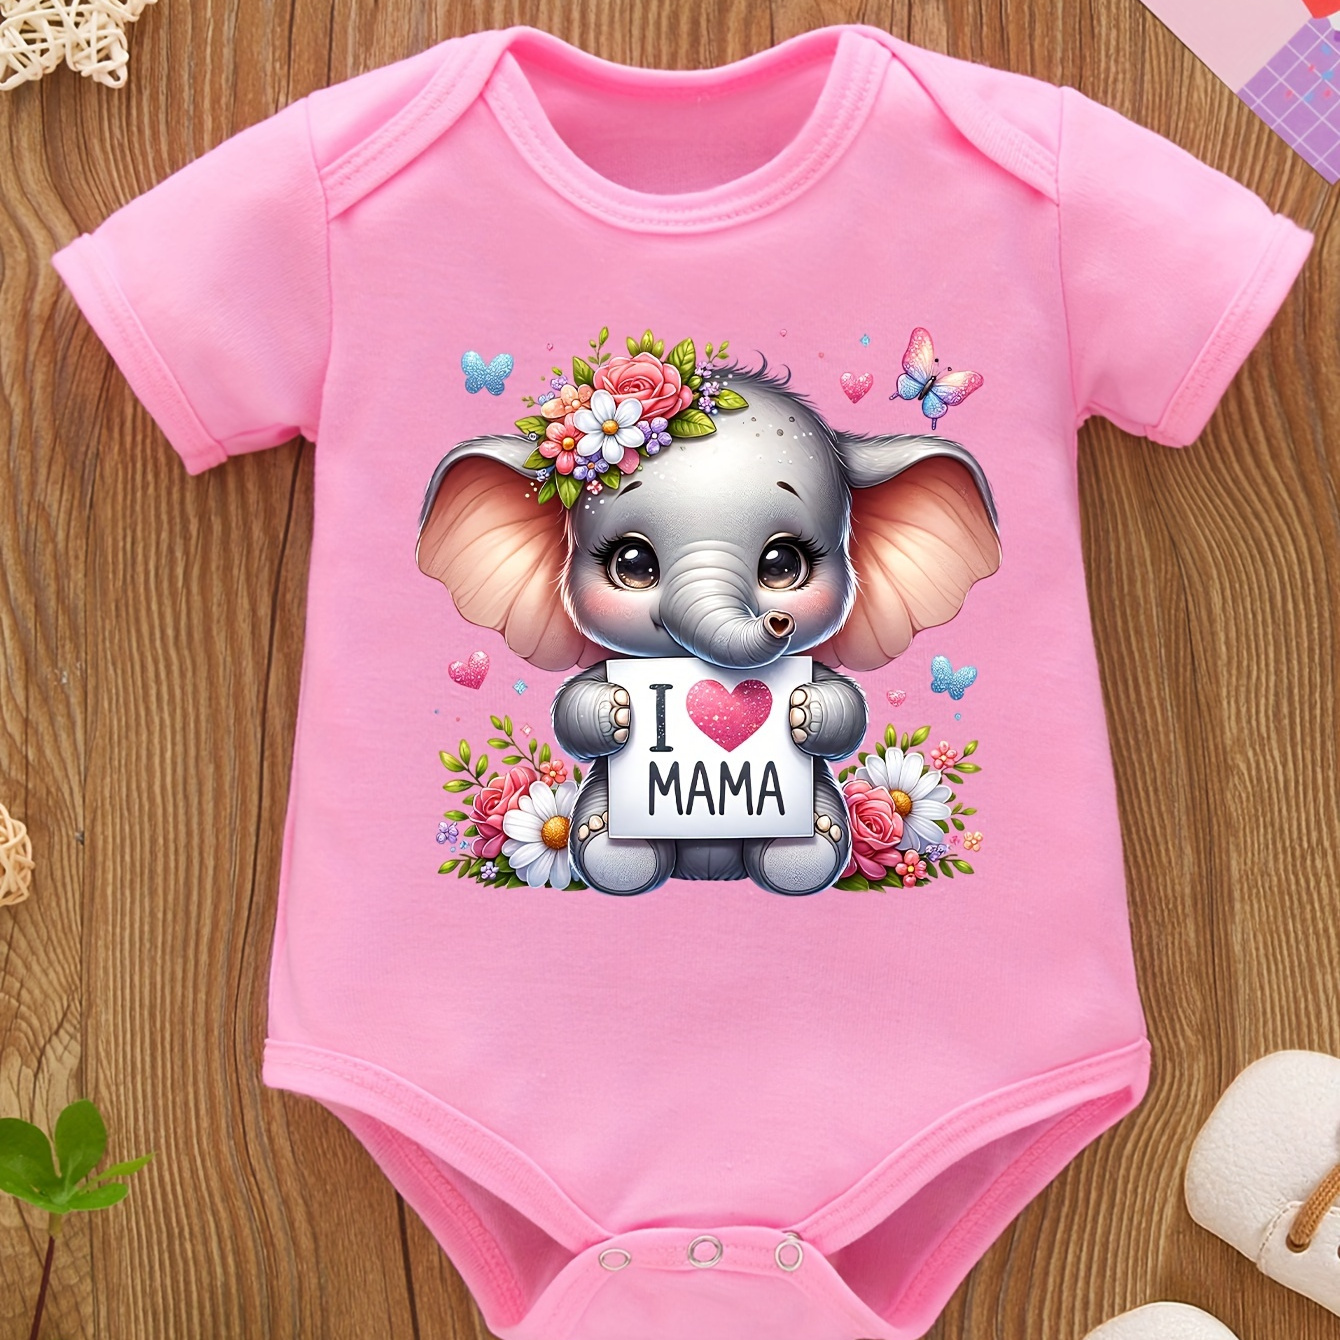 

Baby's "i Love Mama" Cartoon Elephant Print Triangle Bodysuit, Comfy Short Sleeve Romper, Toddler & Infant Girl's Onesie For Summer, As Gift